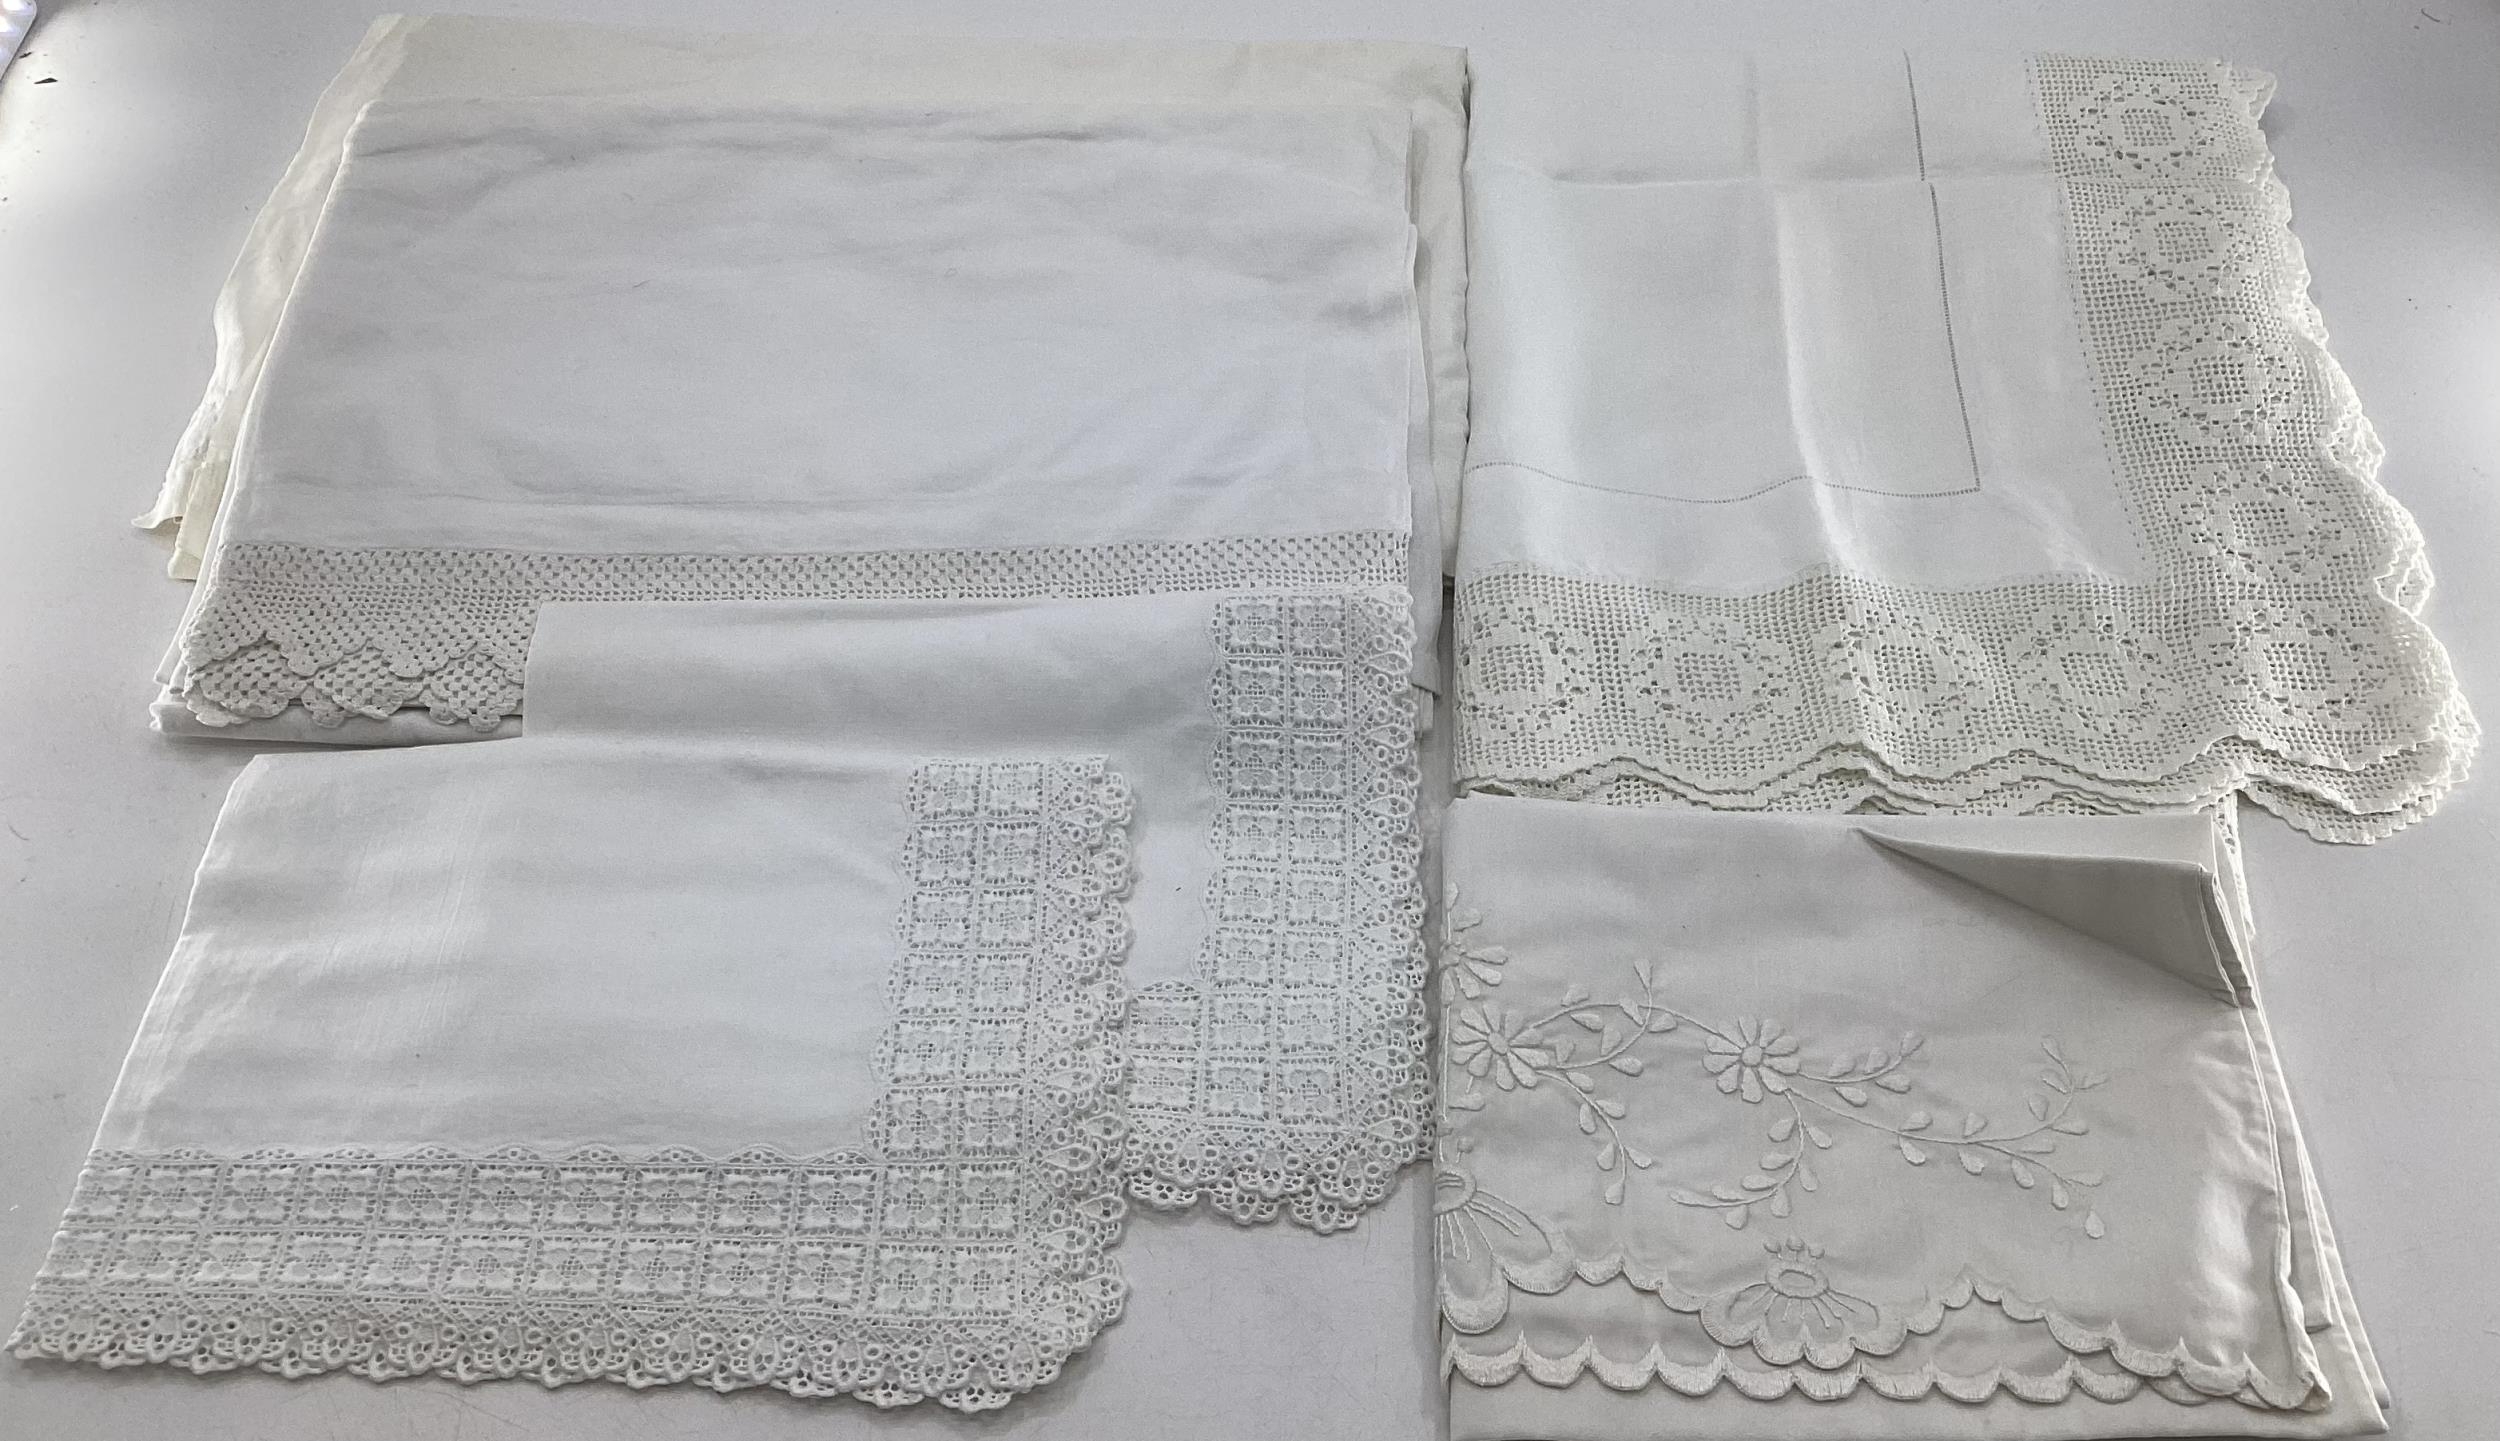 A collection of lace and linens.